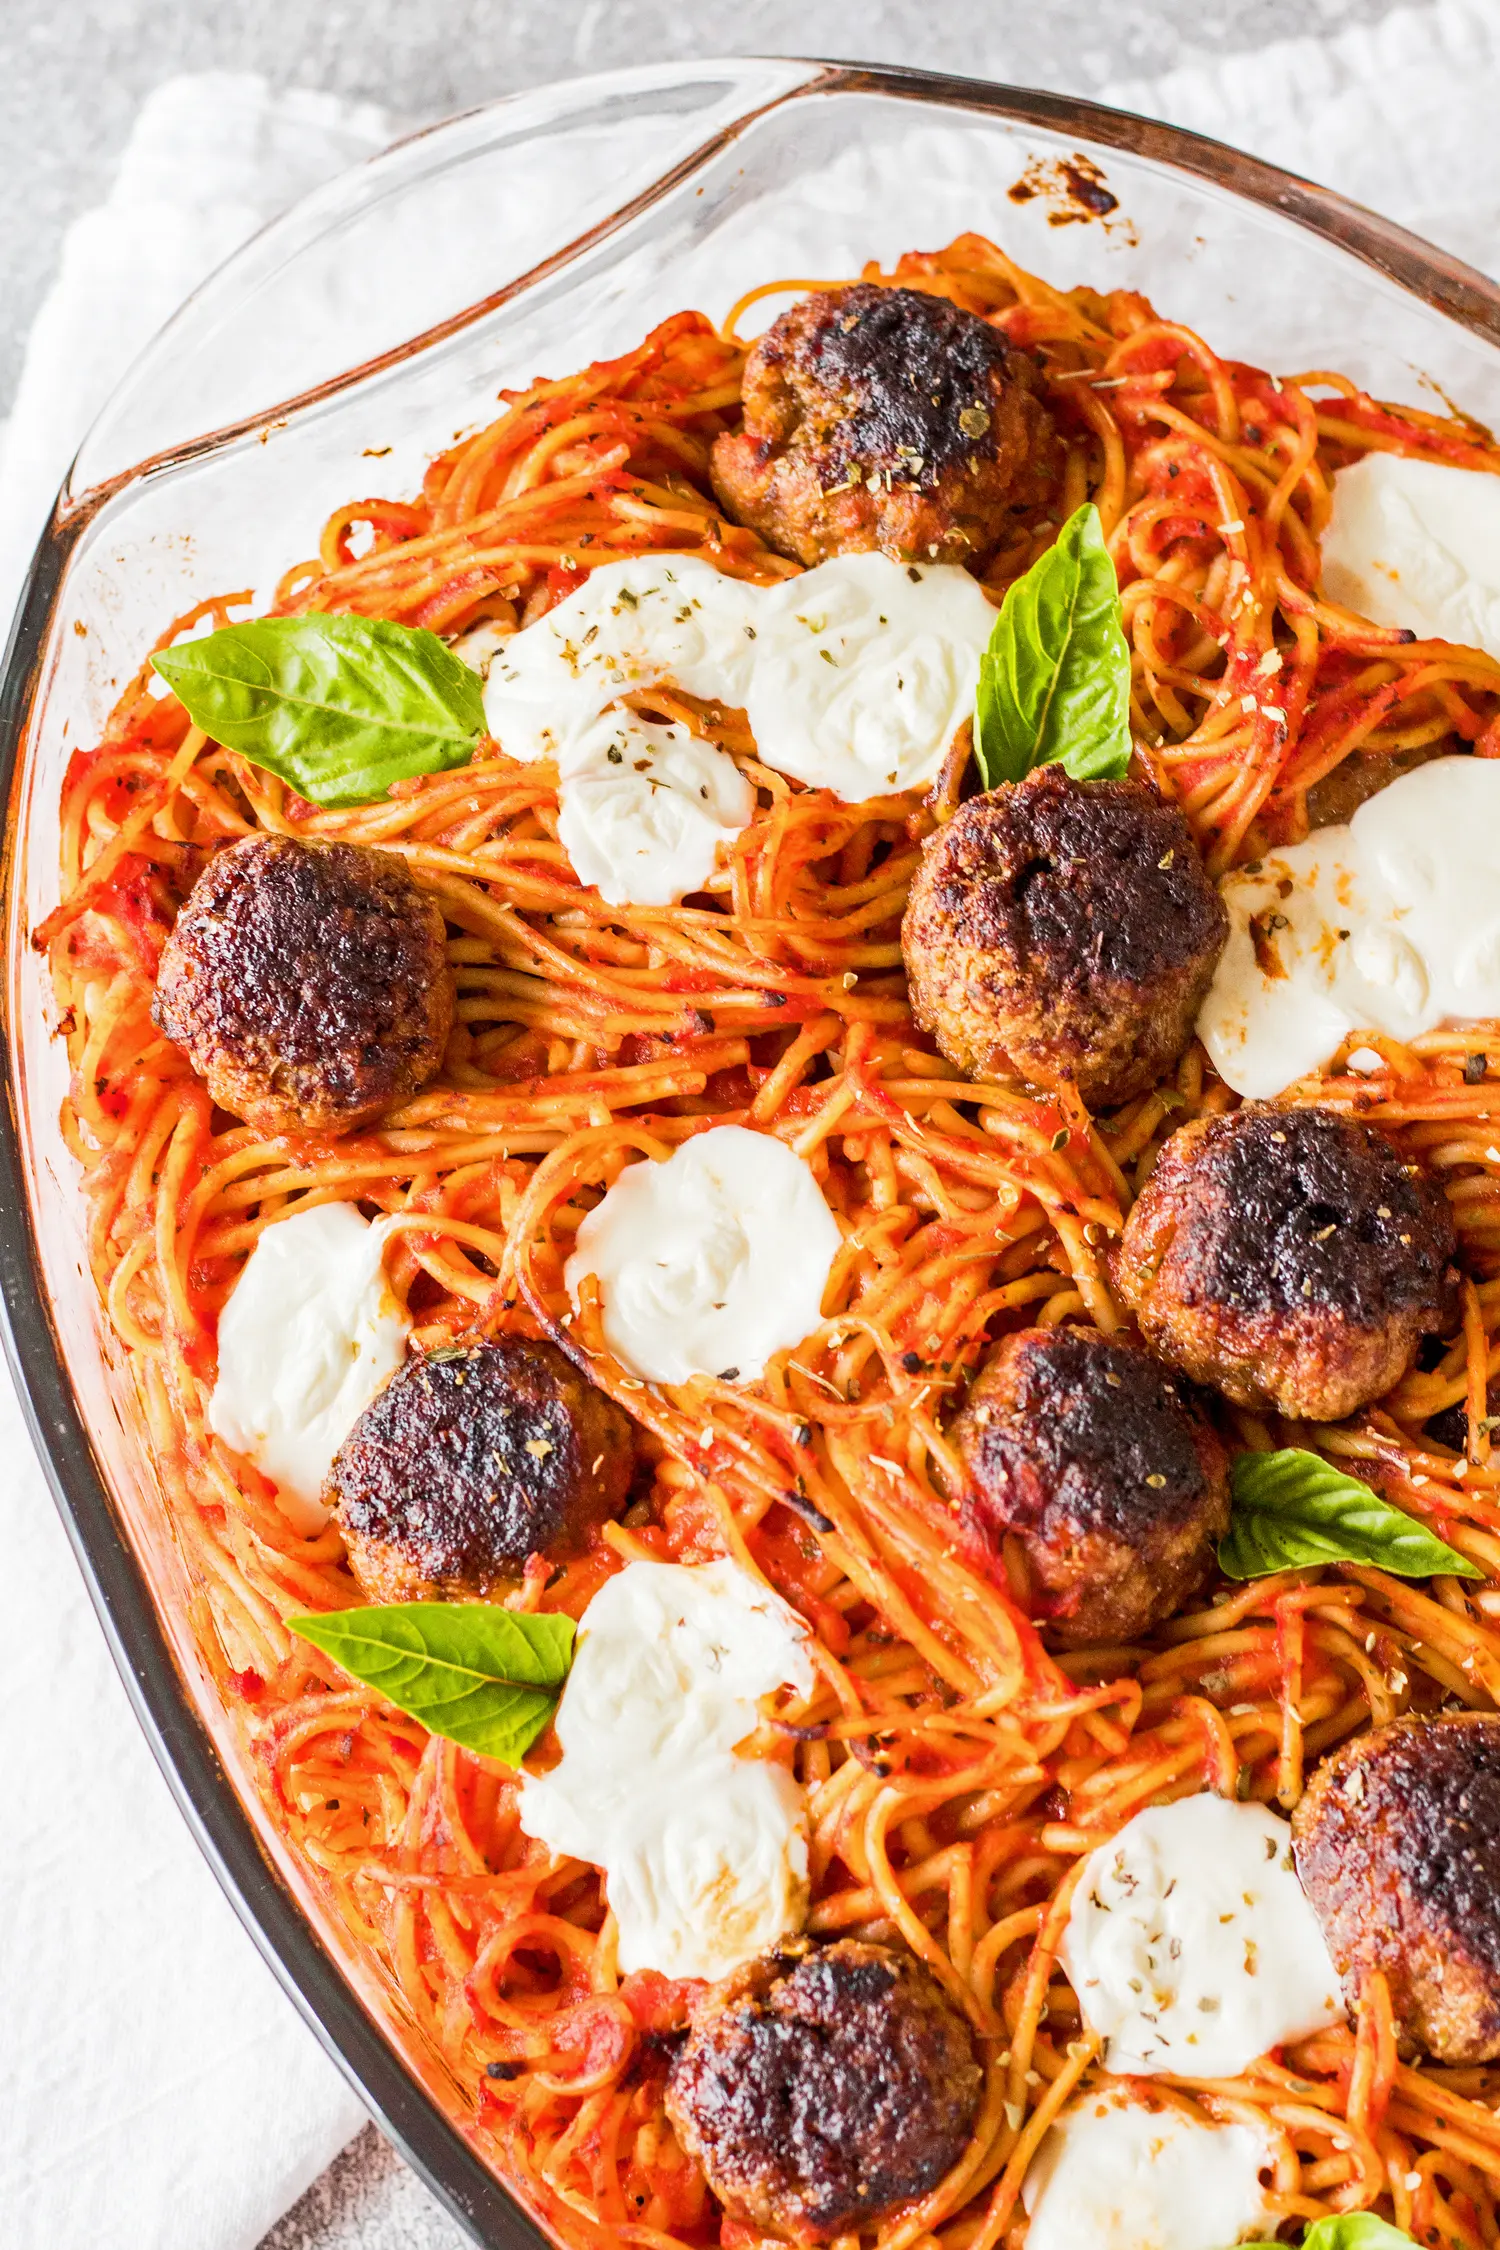 Overhead vertical image of baked spaghetti and meatballs in a clear casserole dish baked with fresh baby mozzarella and garnished with genovese basil leaves on a light grey background.